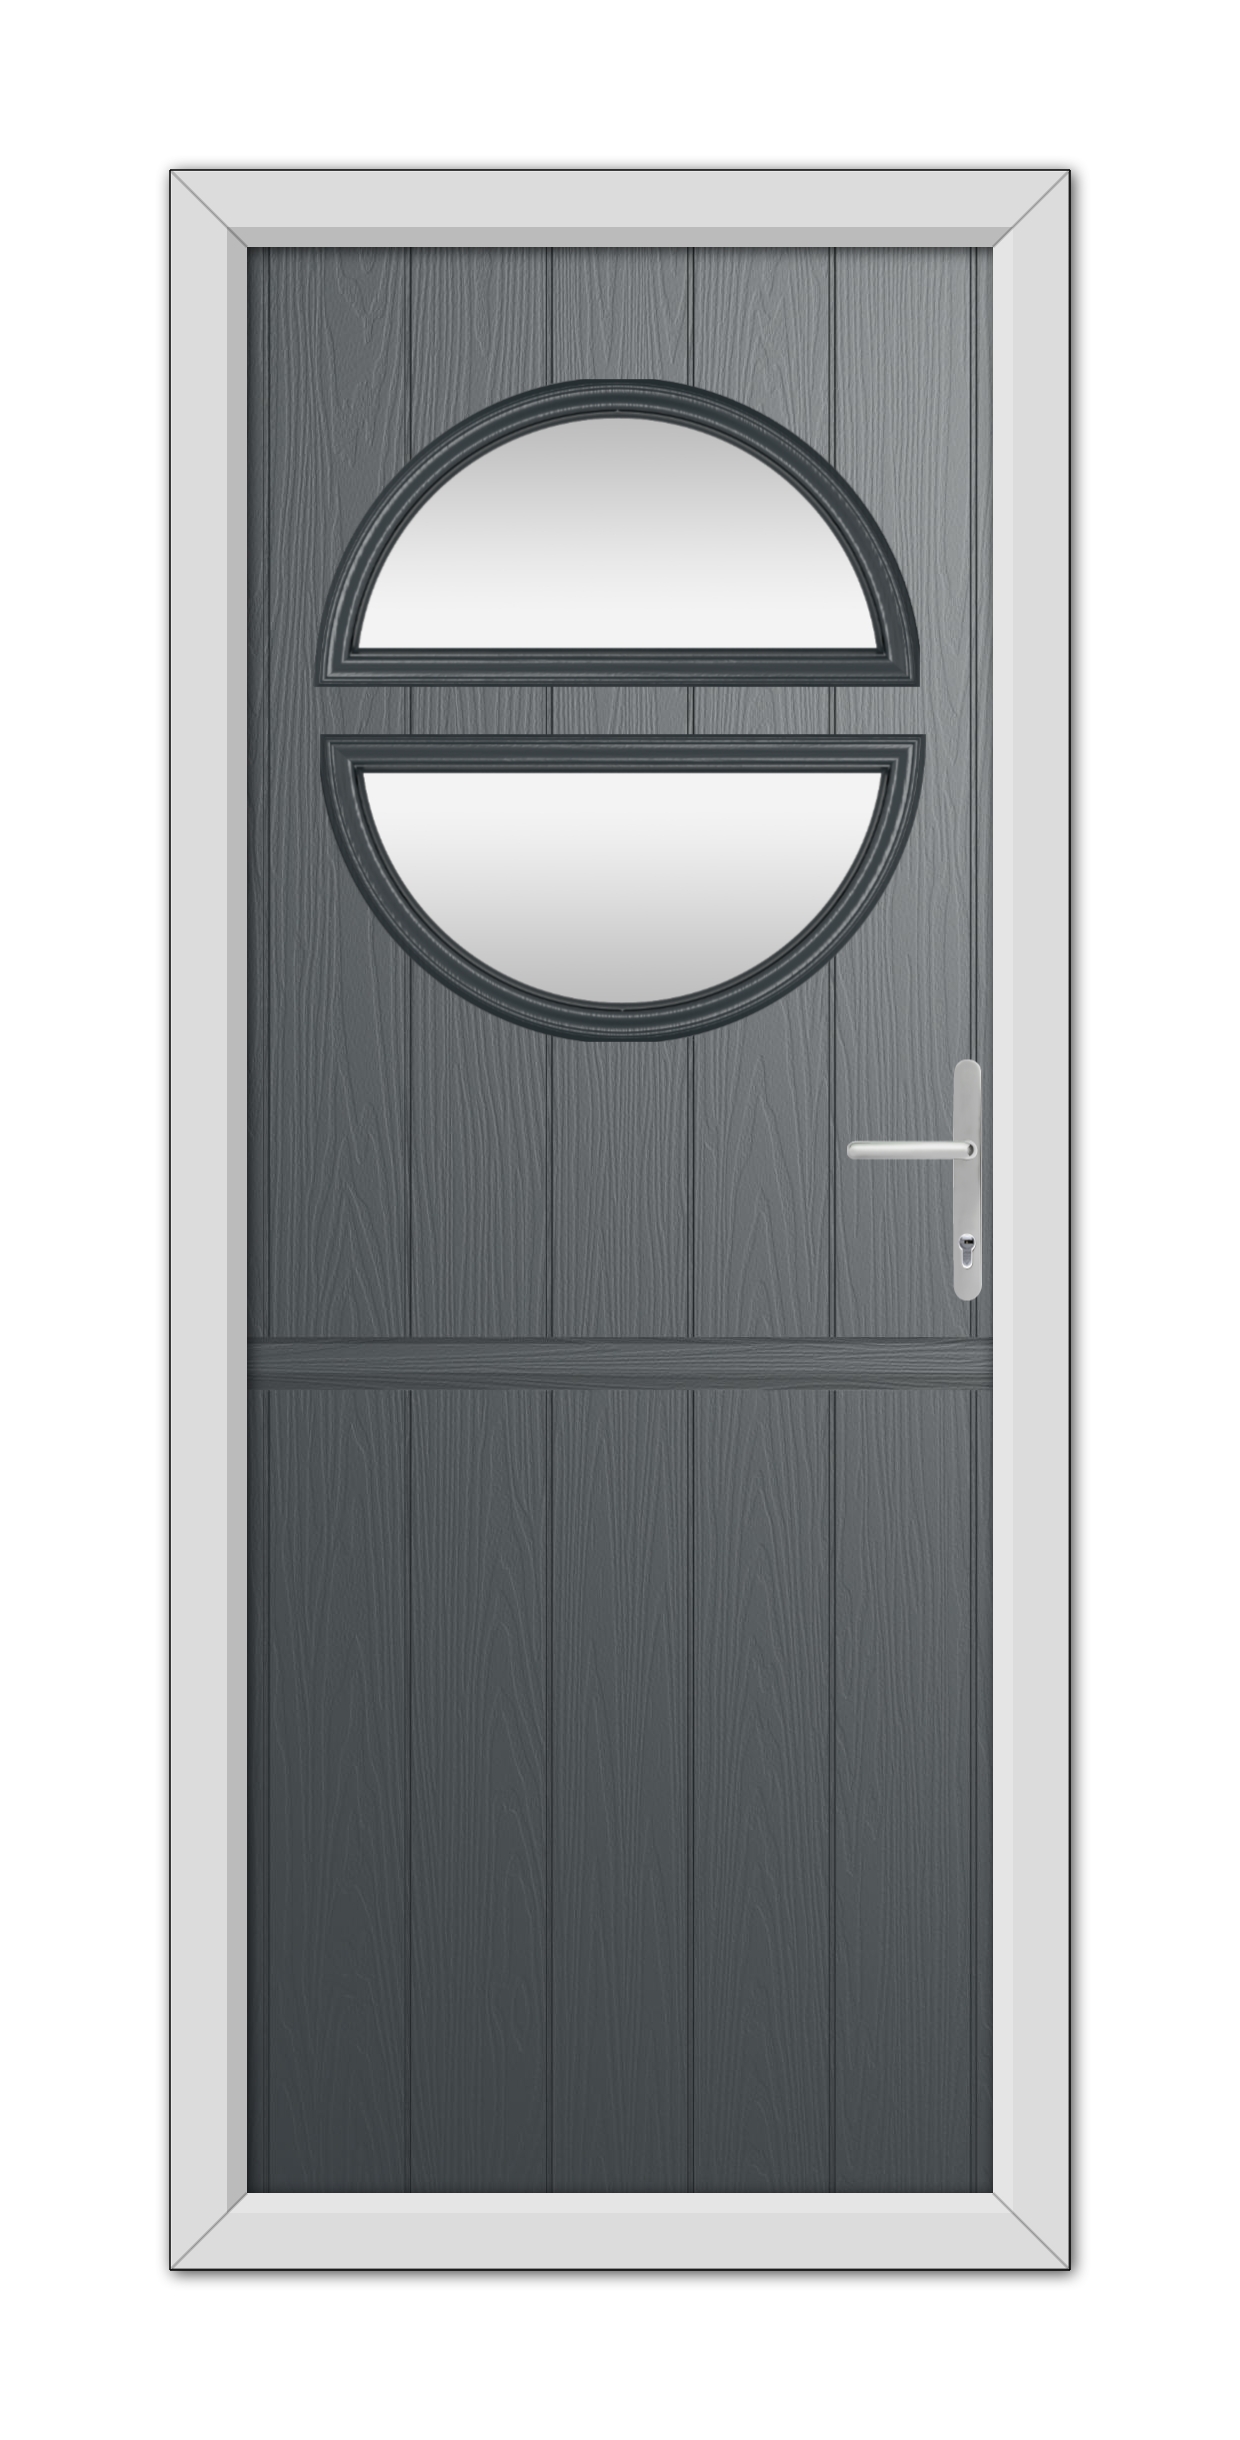 A modern Anthracite Grey Kent Stable Composite Door 48mm Timber Core featuring an oval glass window at the top and a metal handle on the right.